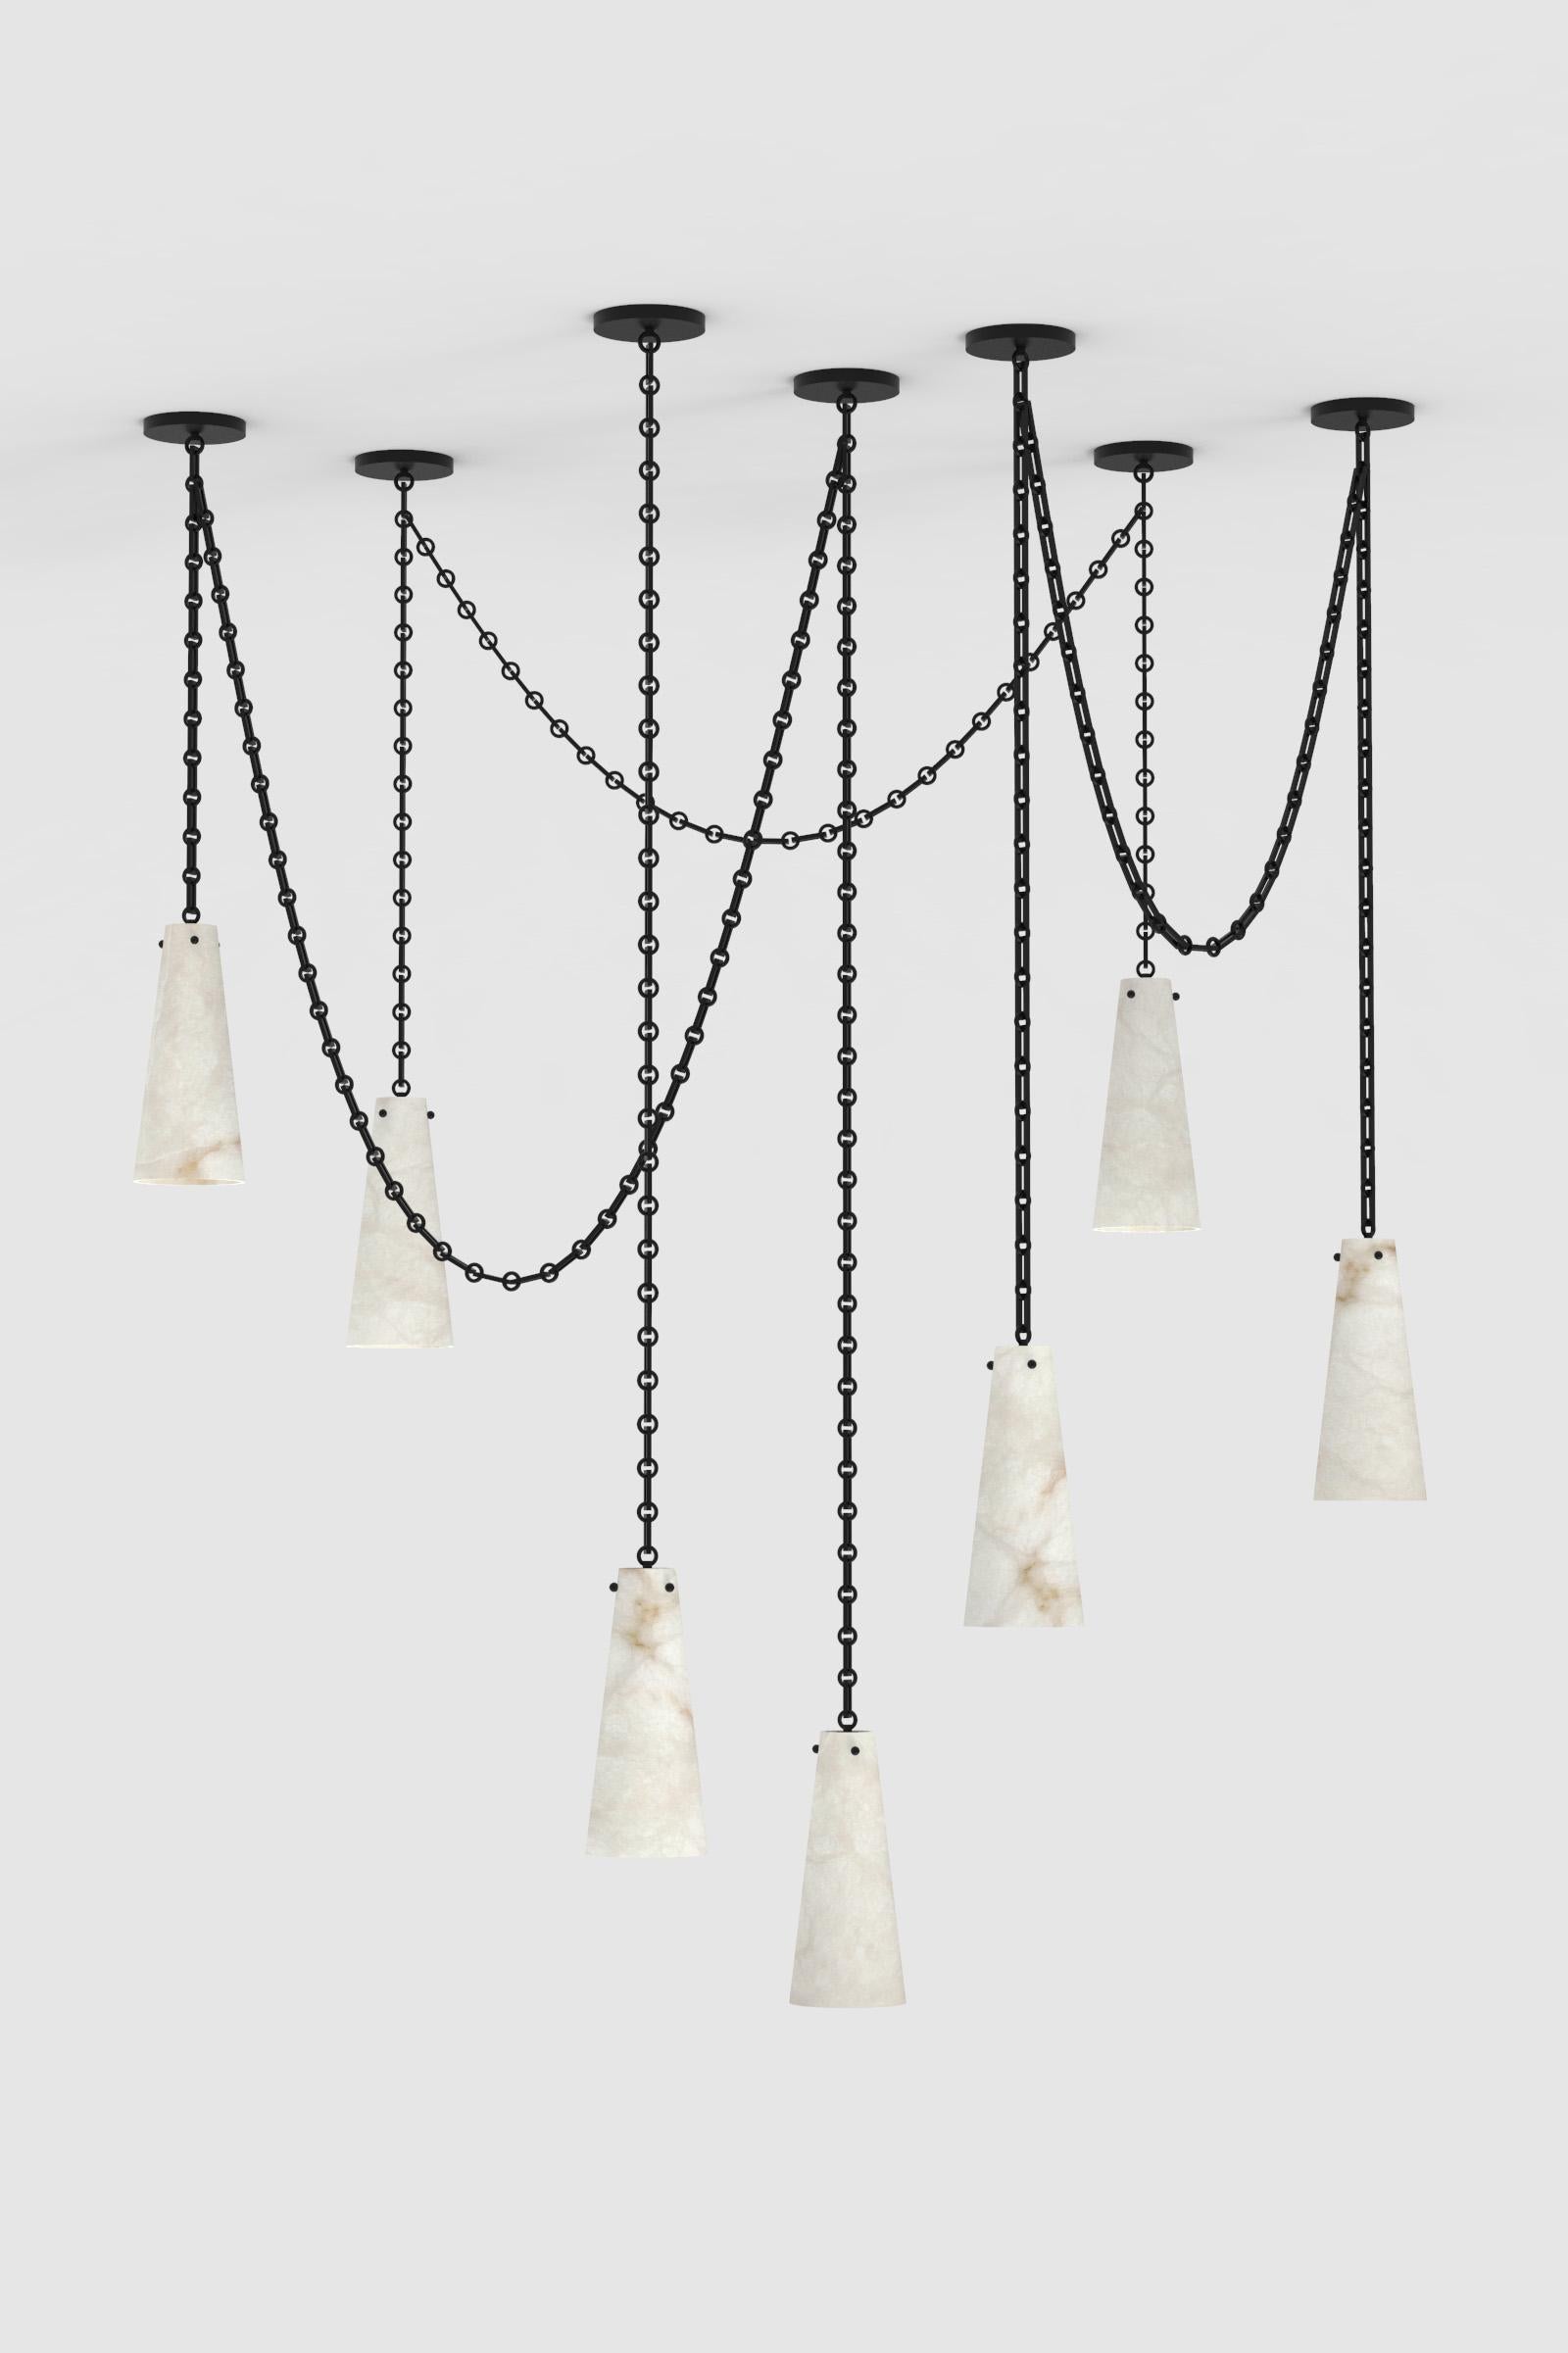 Orphan work 202A-7 chandelier BLK, 2021
Shown in alabaster with blackened brass
Available in brushed brass and blackened brass
Measures: 15” H x 6 1/2” W
Height and width to order*
Canopy 6